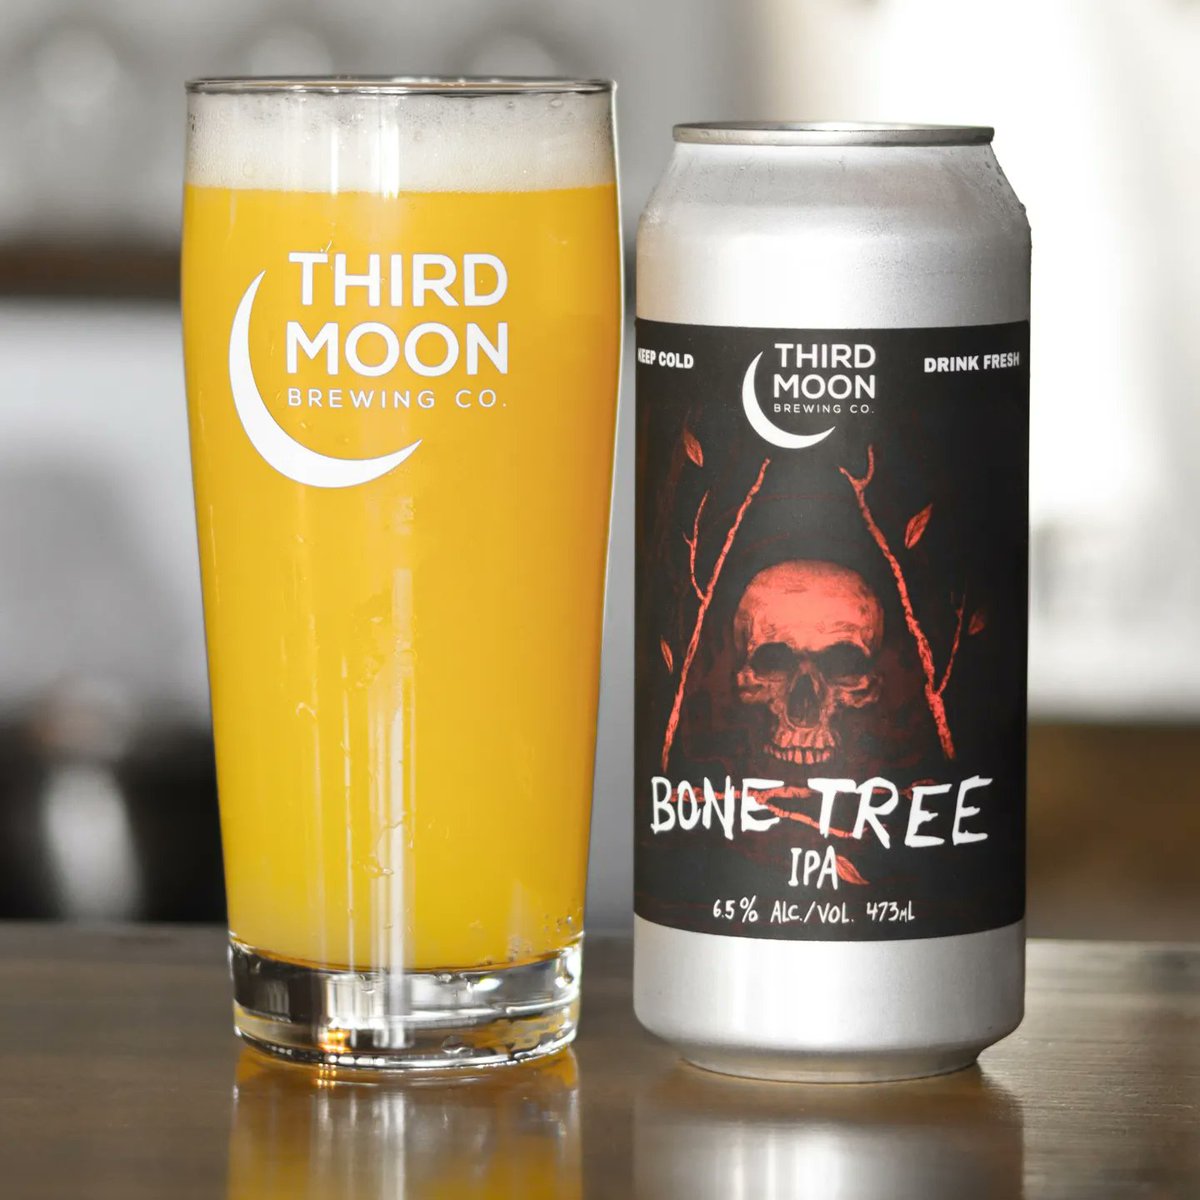 Final release this week is a fresh batch of Bone Tree! See our Instagram for full details 🍻